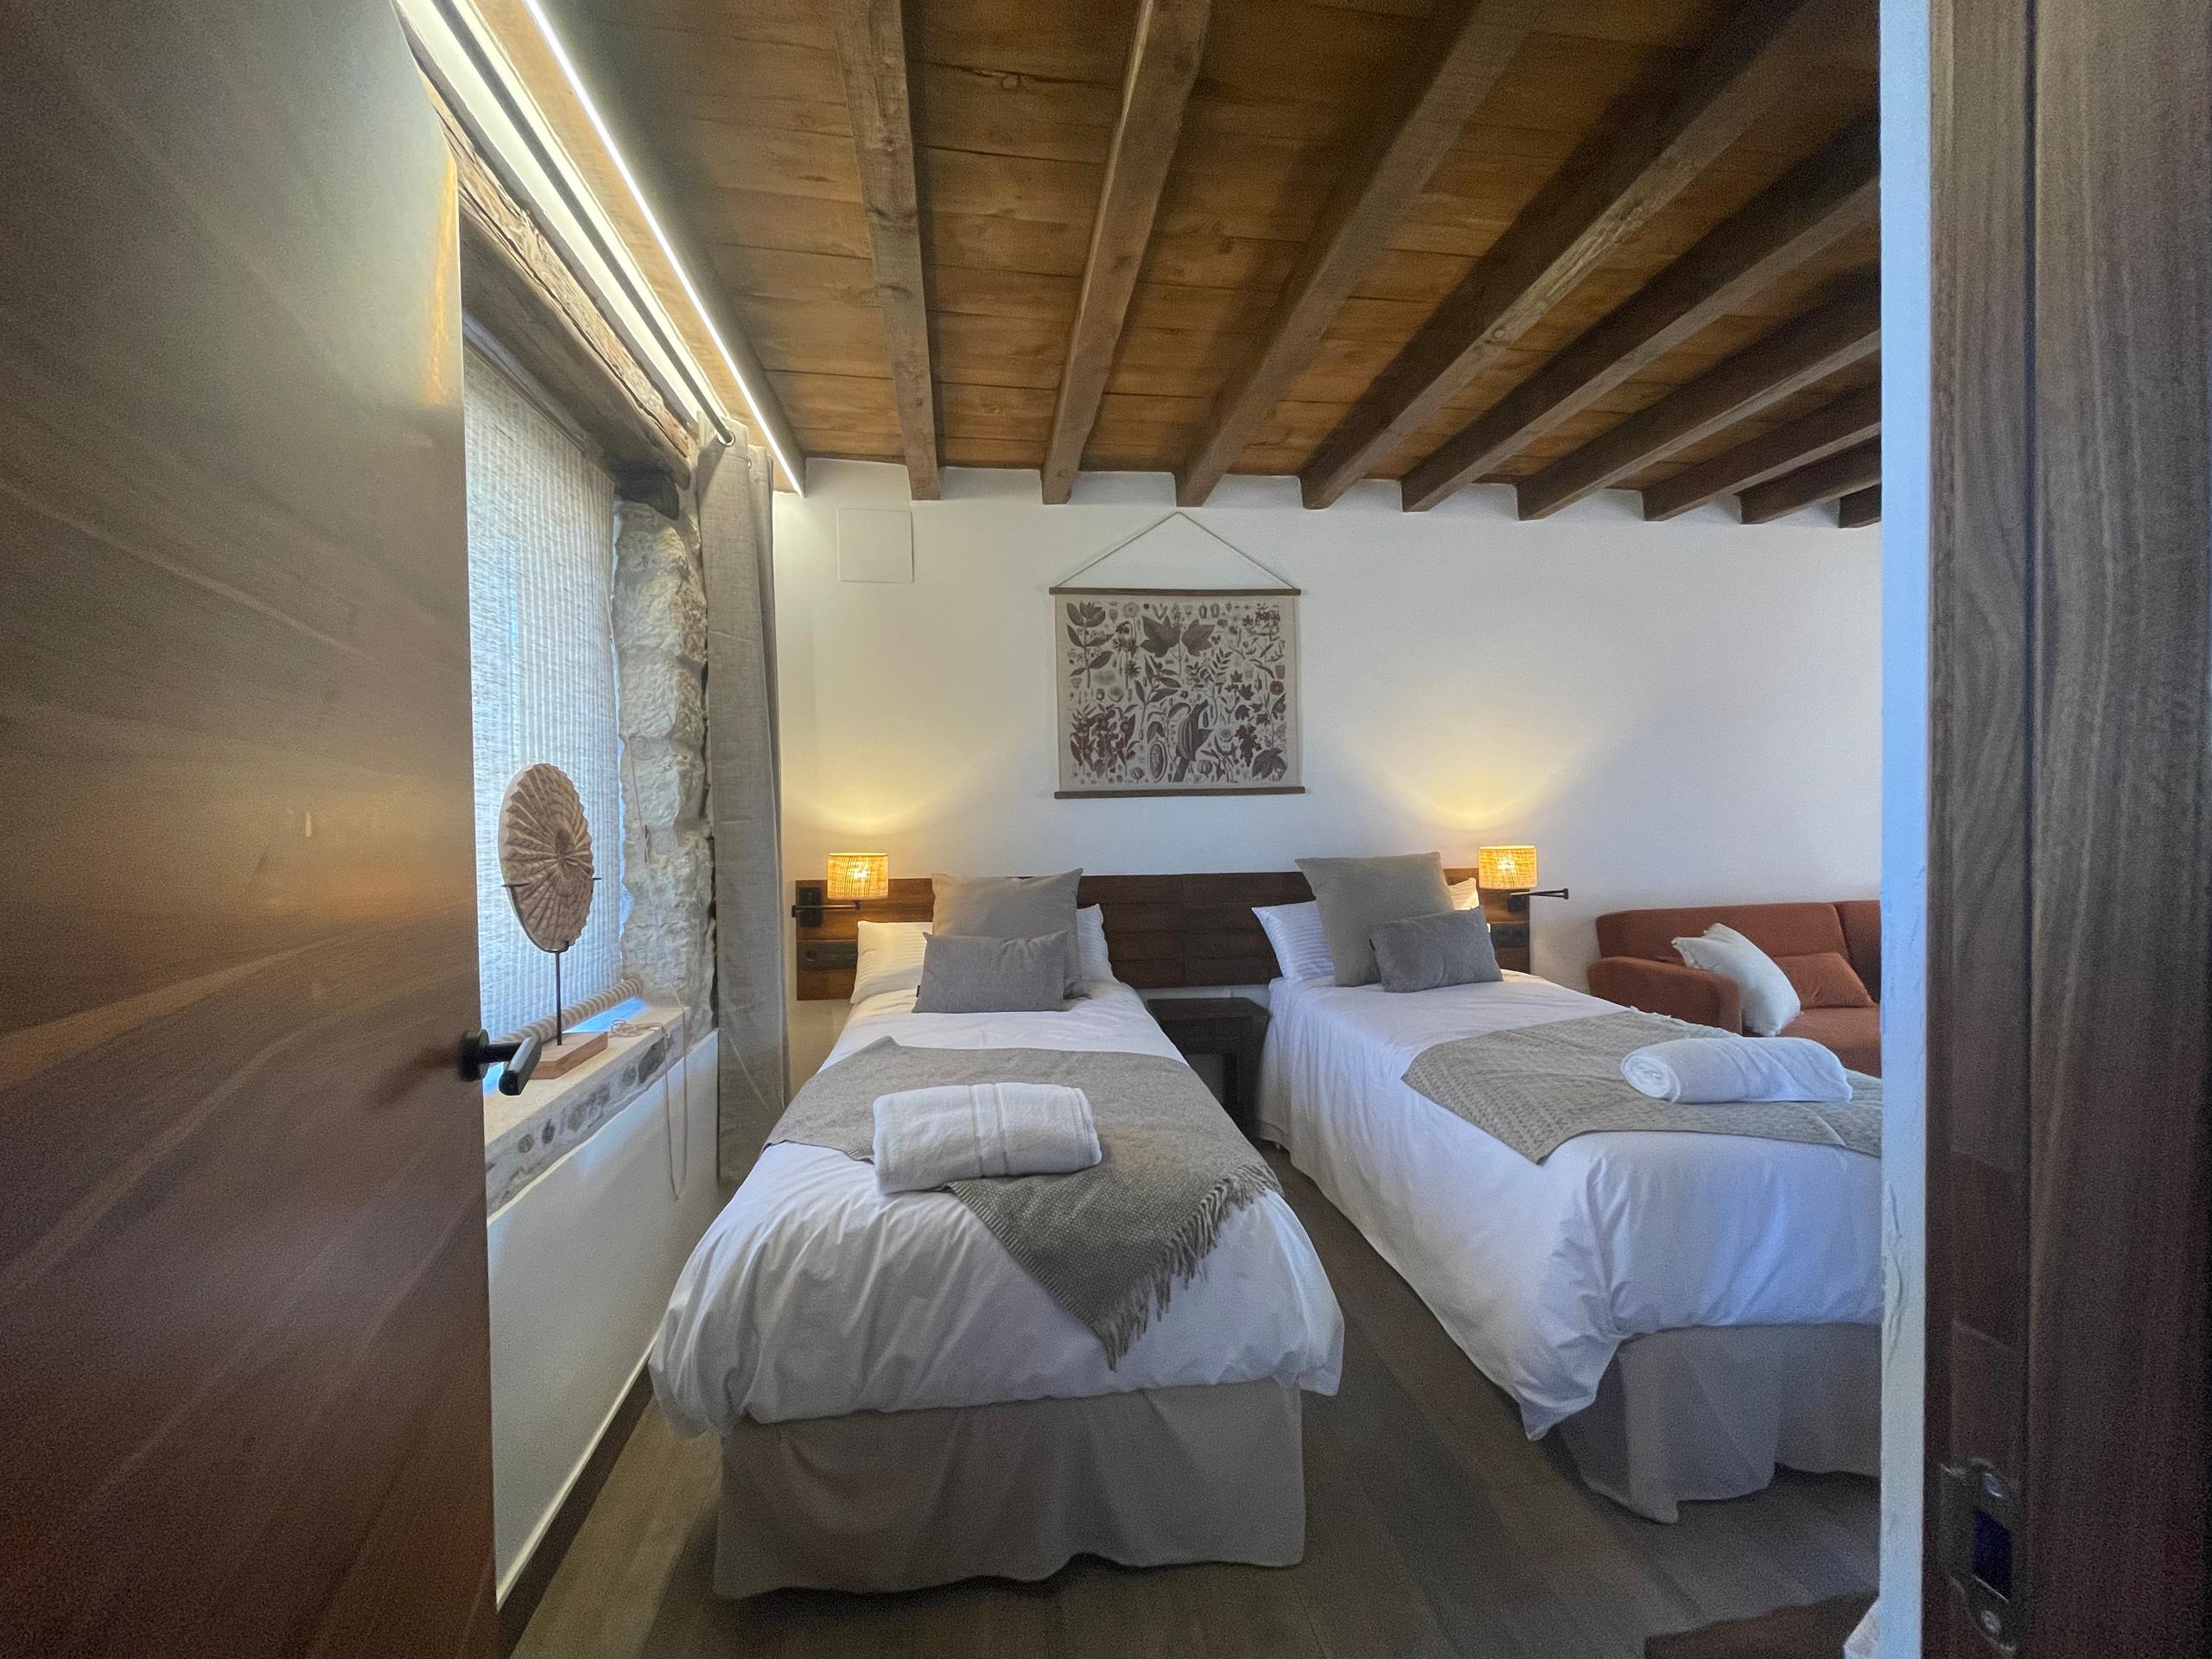 Gneis Suite, a large room at a Boutique Rural Hotel in Madrid